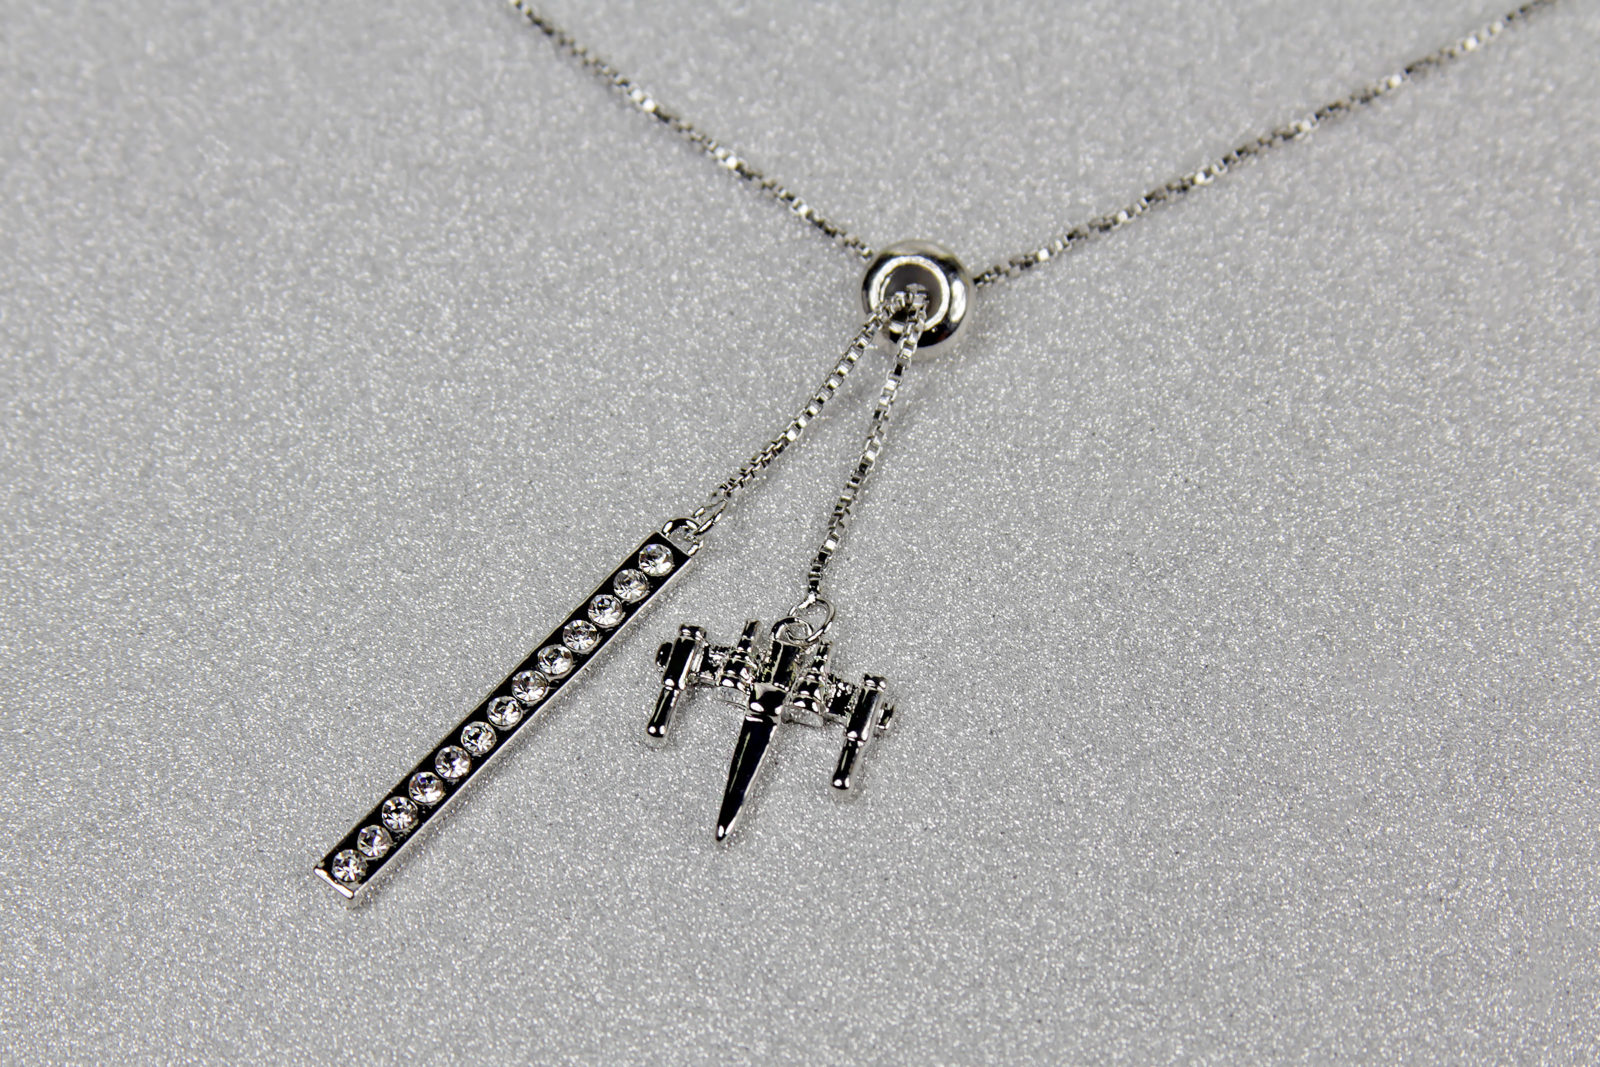 One Force Designs x Star Wars X-Wing Fighter Necklace (Silver Plated)